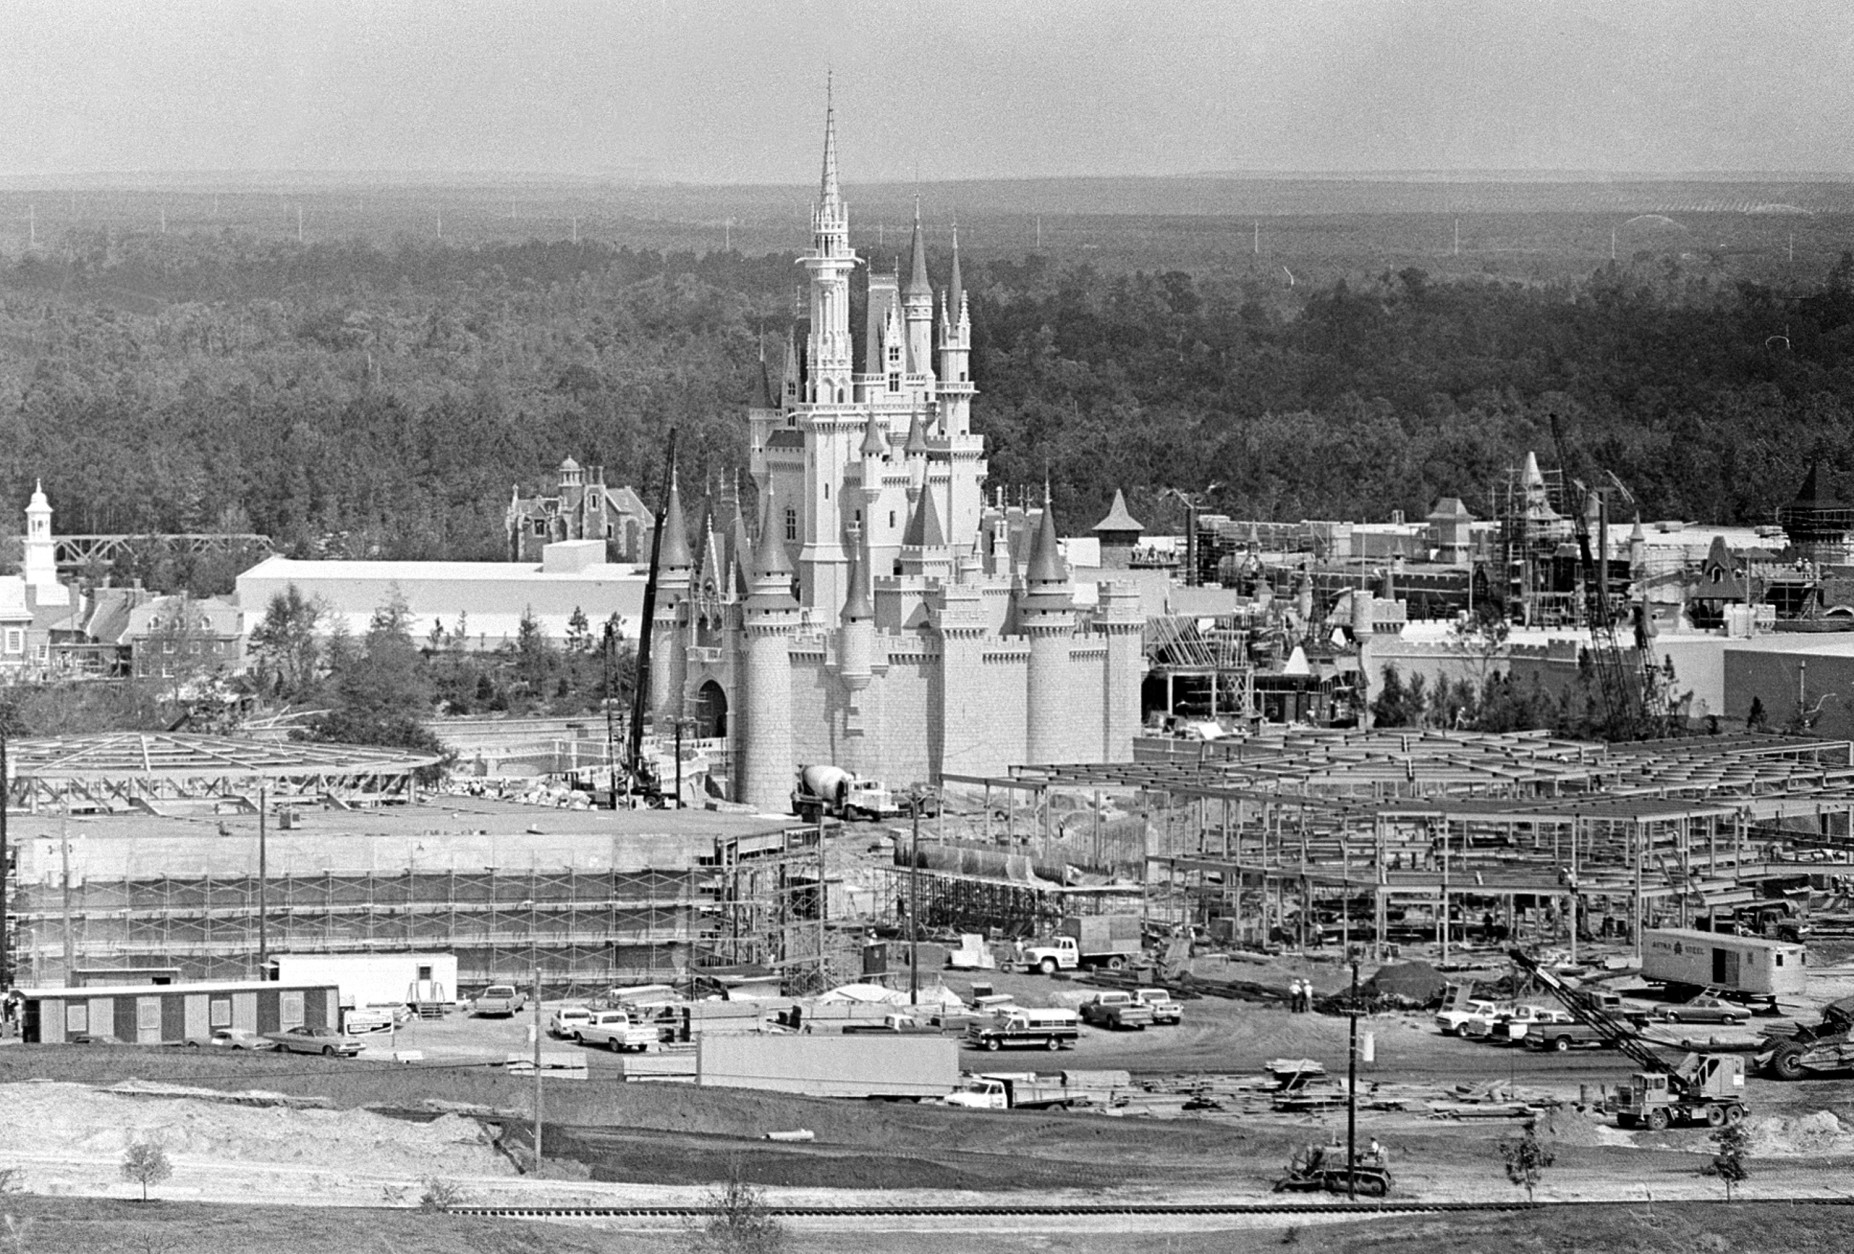 This general view shows Walt Disney World under construction near Orlando in Central Florida, on July 7, 1971.  At center is the amusement park's Cinderella Palace in the Magic Kingdom.  (AP Photo)